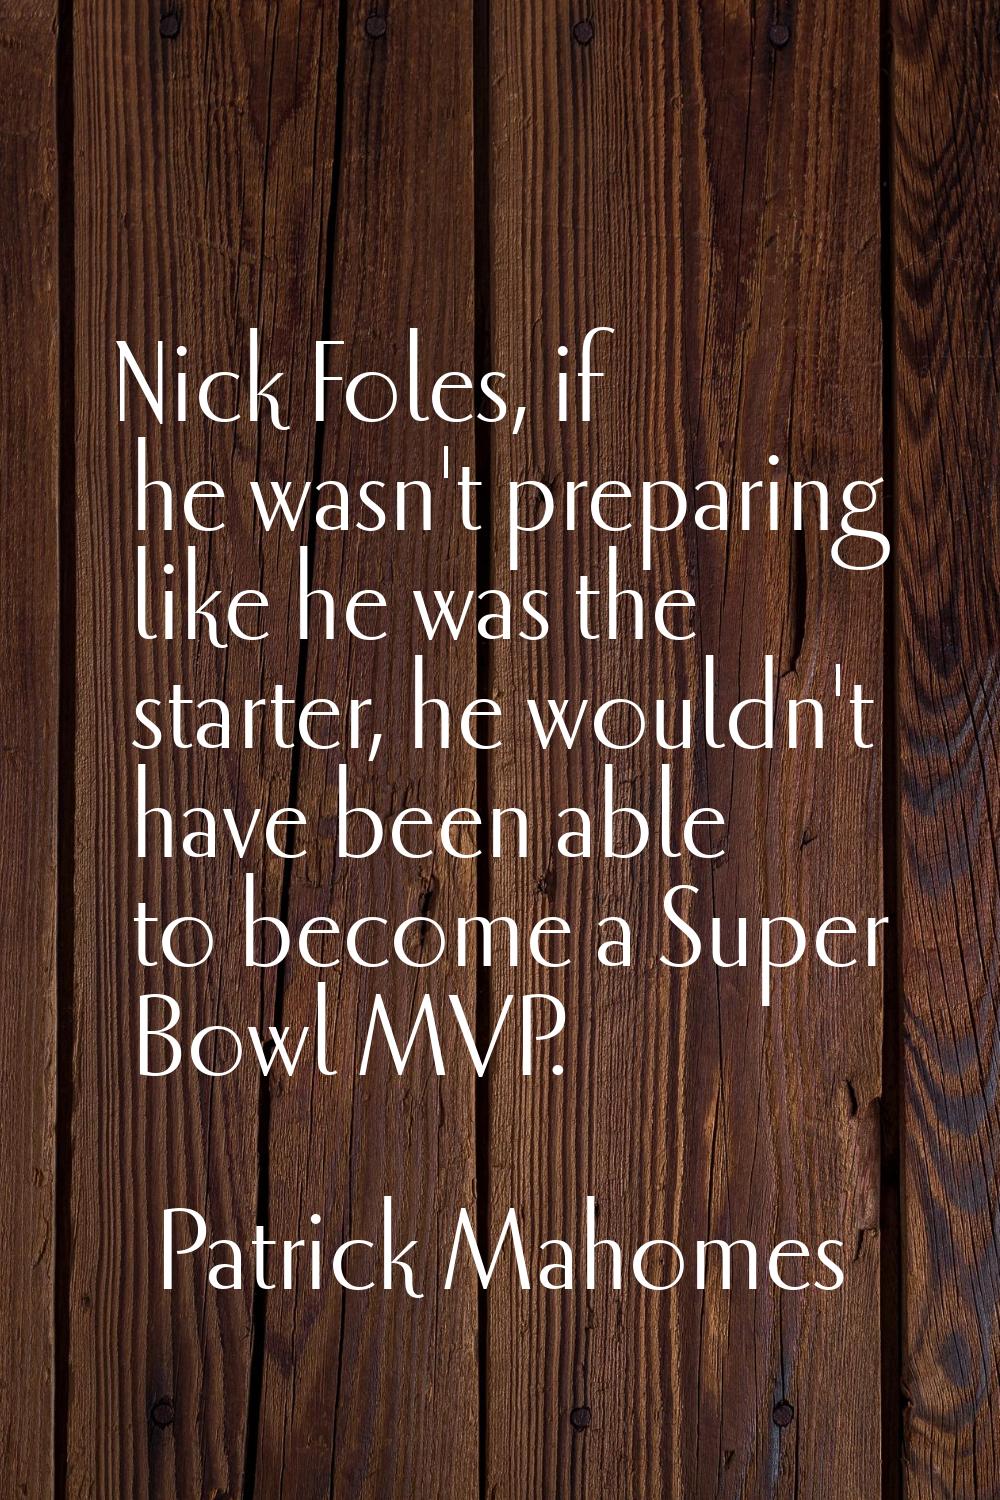 Nick Foles, if he wasn't preparing like he was the starter, he wouldn't have been able to become a 